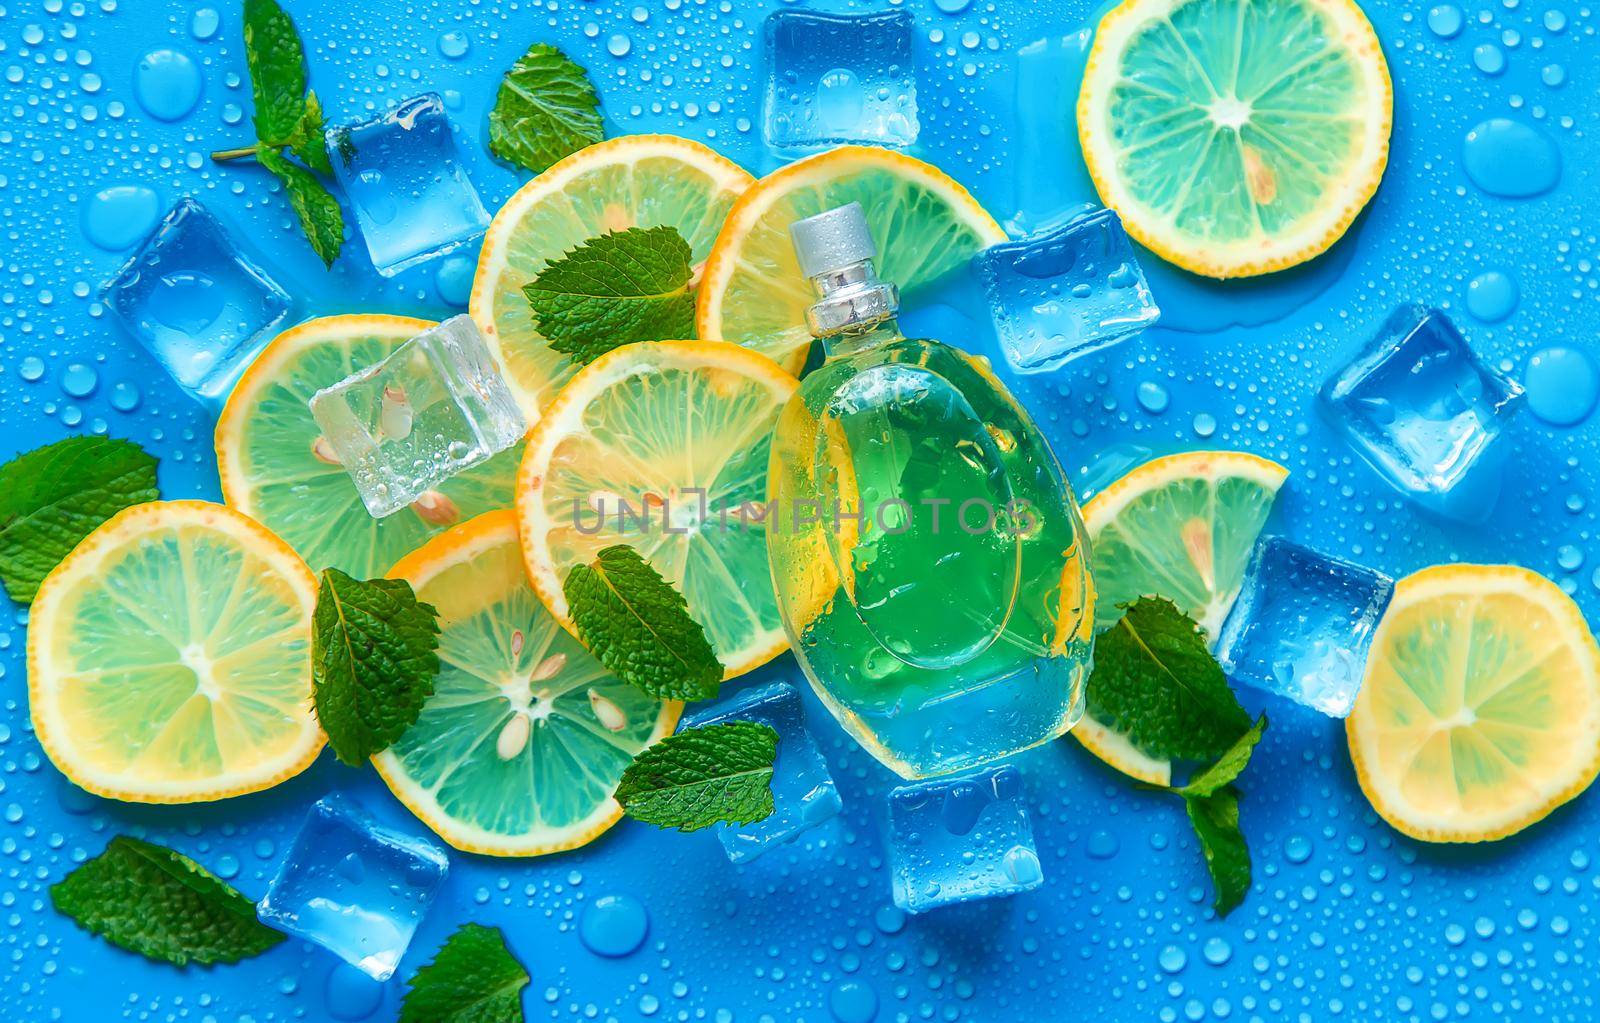 Perfume on a blue background with ice cubes and mint lemon. Selective focus. by yanadjana